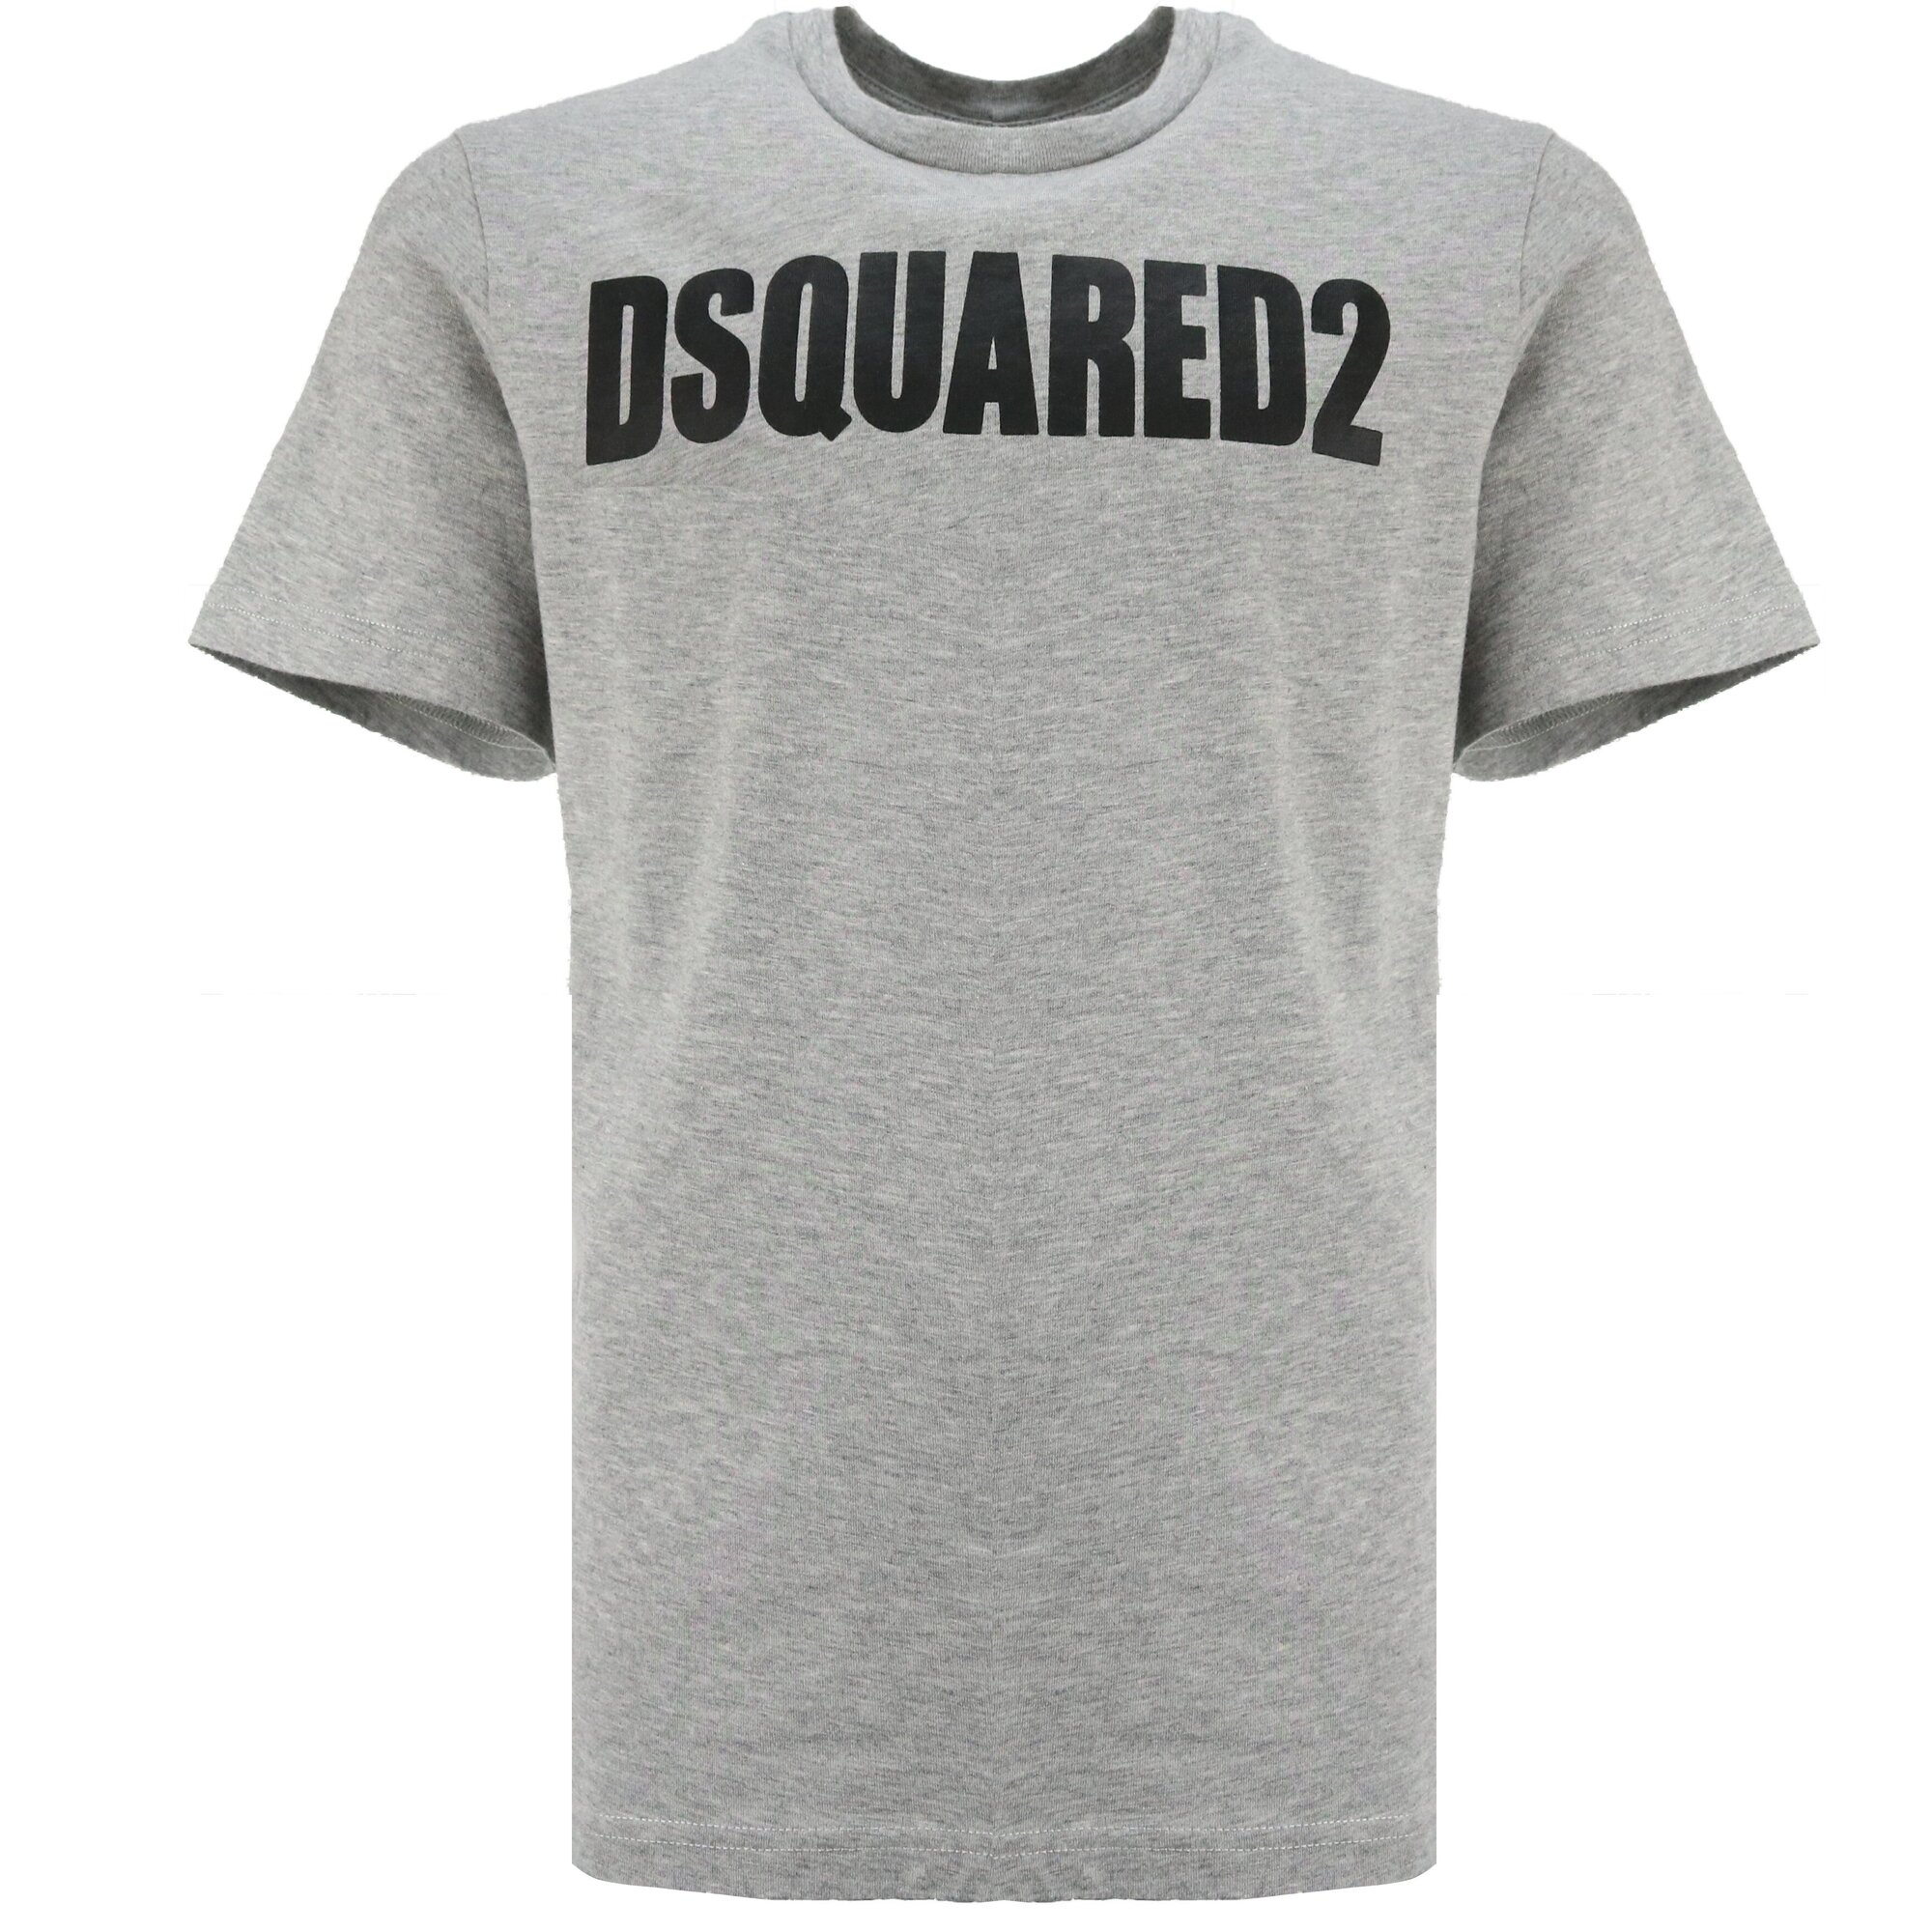 Dsquared2 shirt Grijs DQ0534 Relax Fit